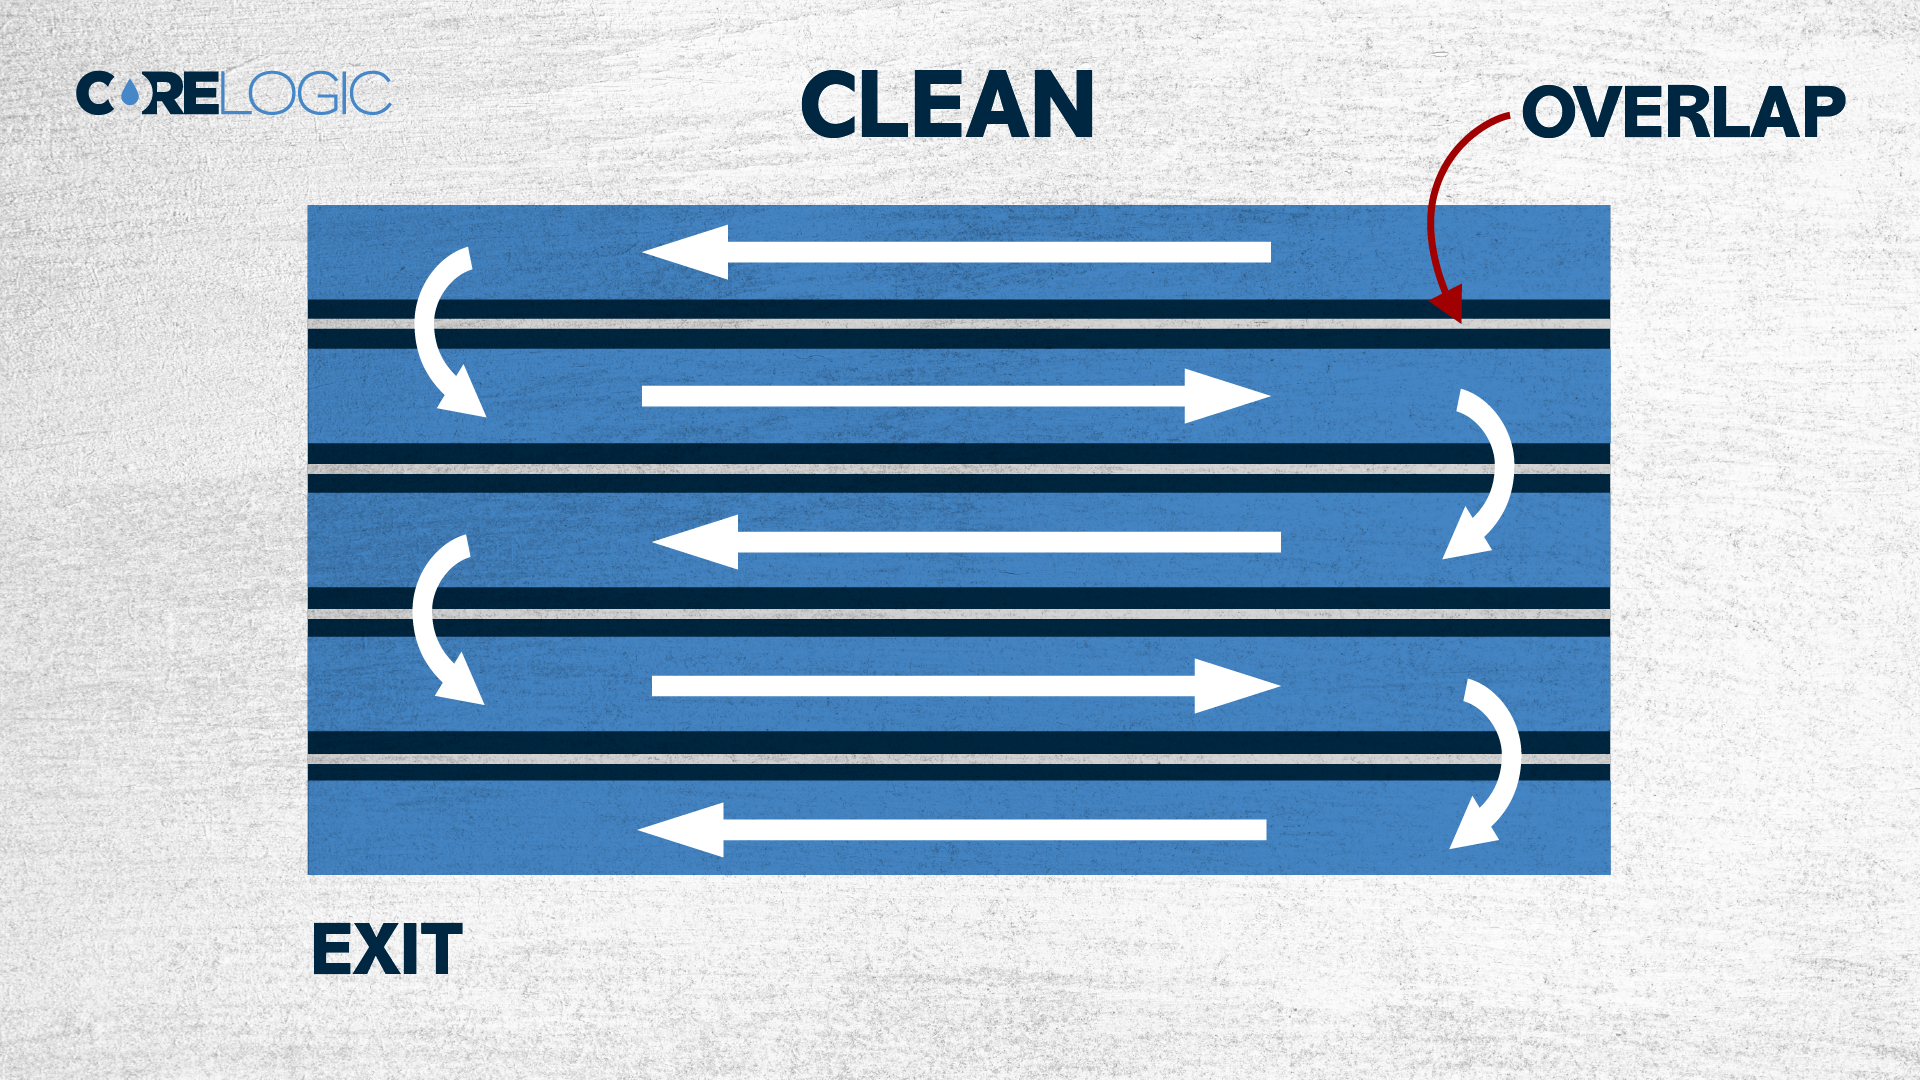 Alternate directions per plank and avoid overlaps to safely mop your CoreLogic LVP.